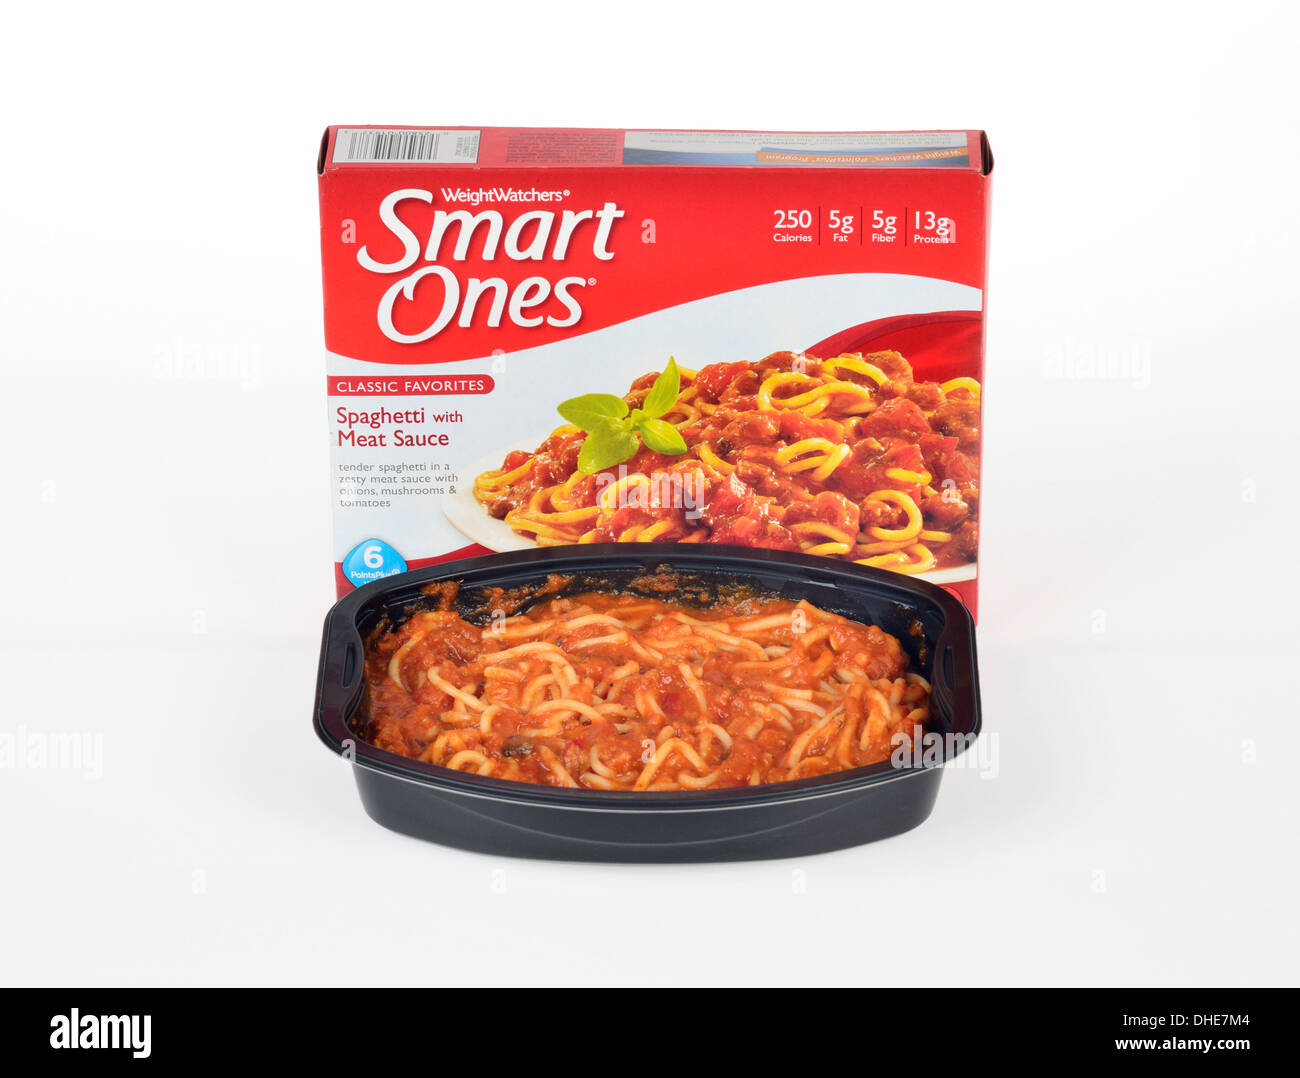 Weight Watchers Smart Ones frozen spaghetti with sauce ready-meal cooked dinner with packaging on white background, cutout. USA Stock Photo